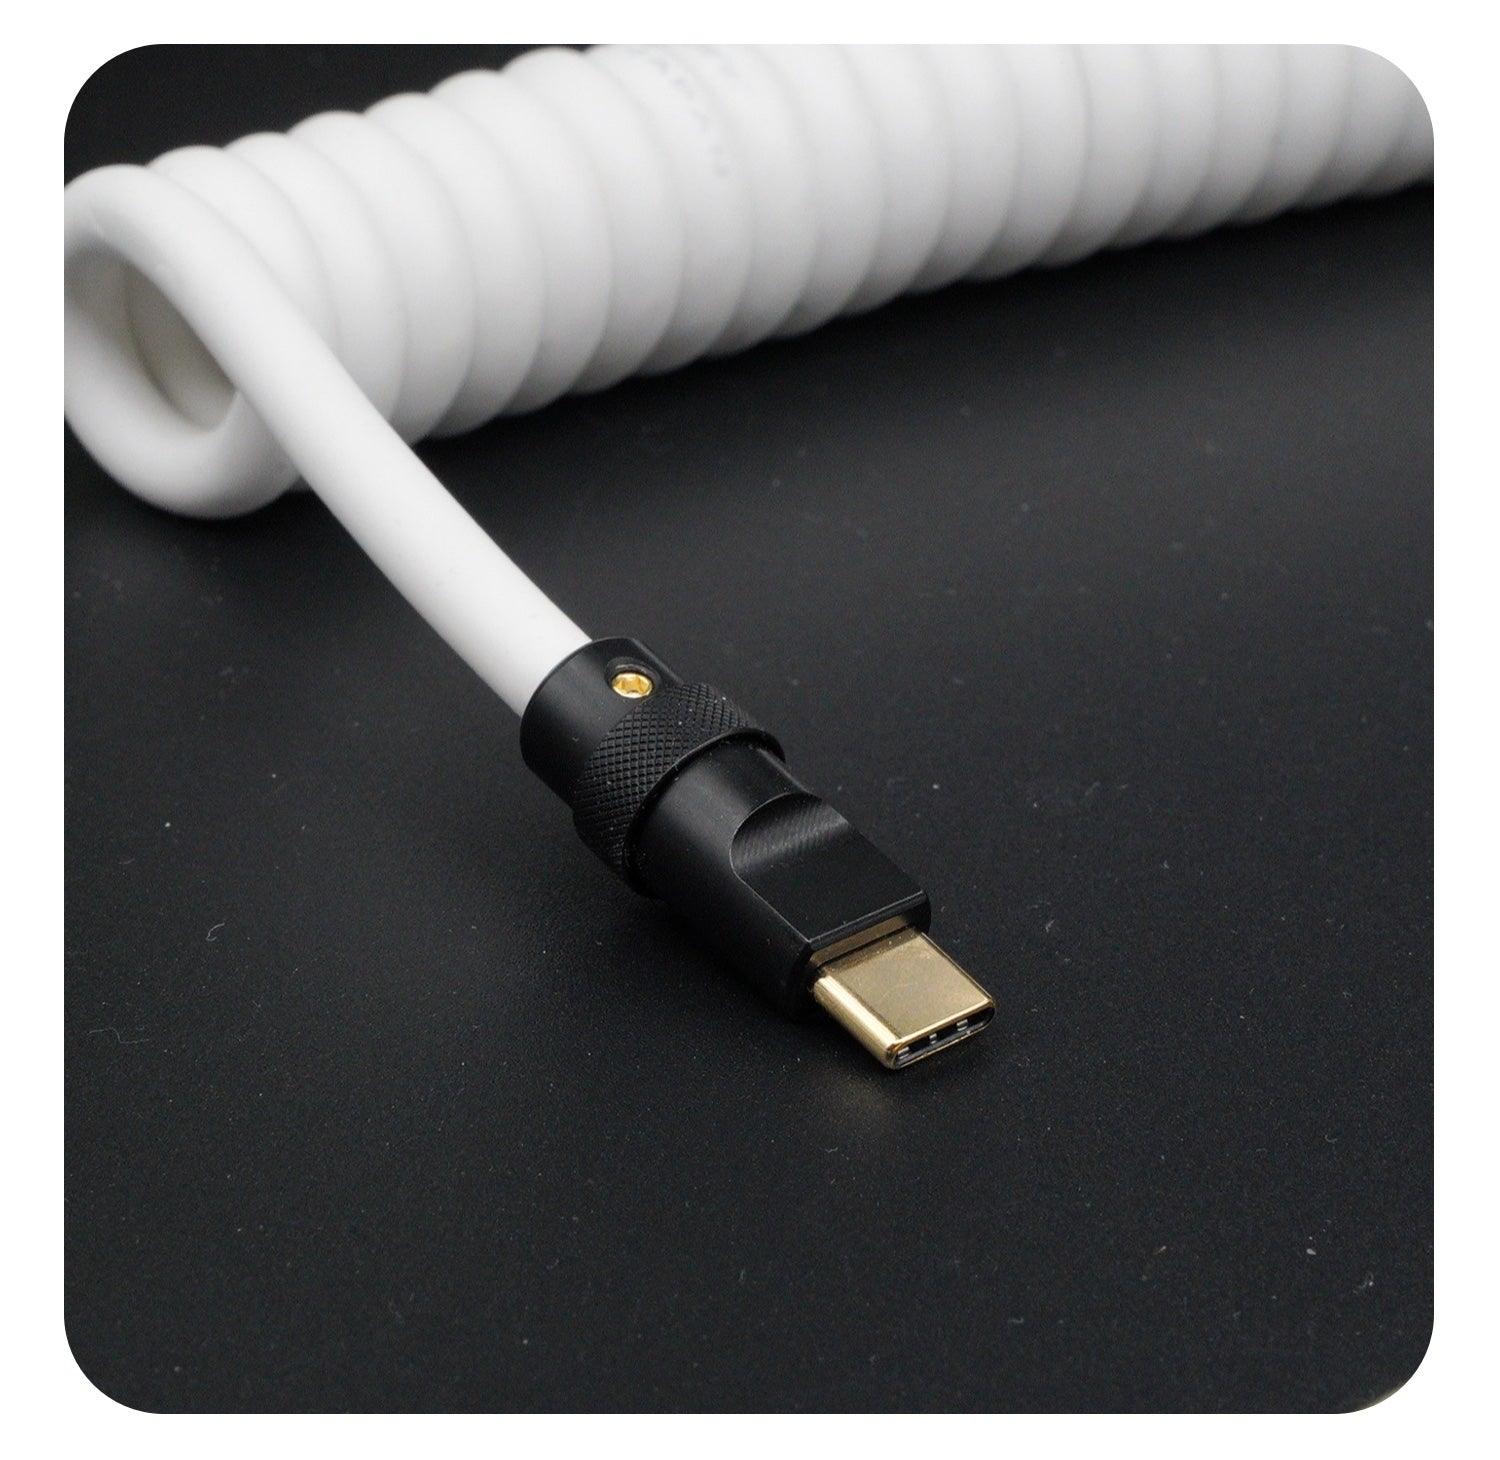 GeekCable White Handmade Customized Keyboard Cable - IPOPULARSHOP